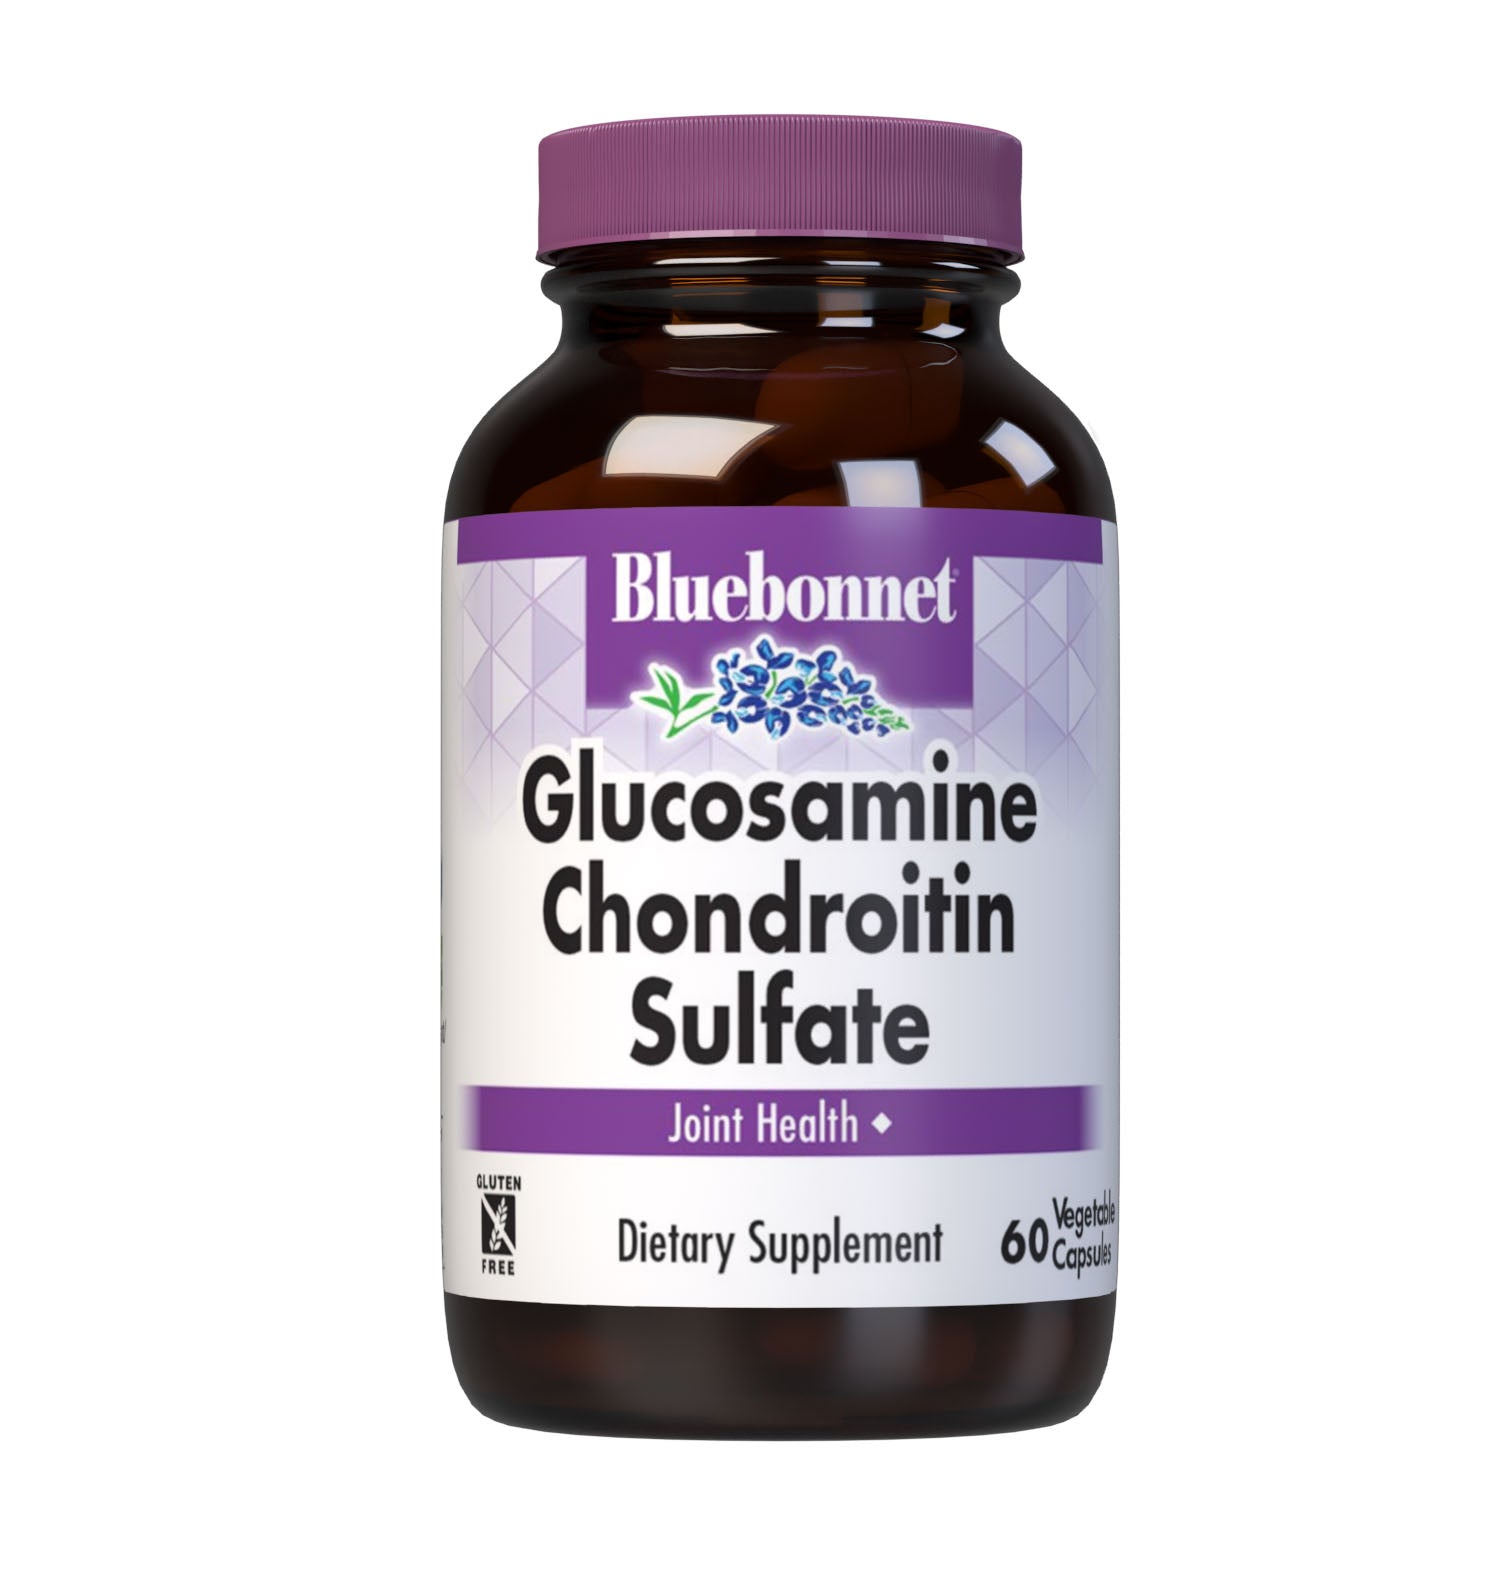 Bluebonnet’s Glucosamine Chondroitin Sulfate 60 Vegetable Capsules are specially formulated with glucosamine sulfate and pure chondroitin sulfate for optimal joint health. #size_60 count